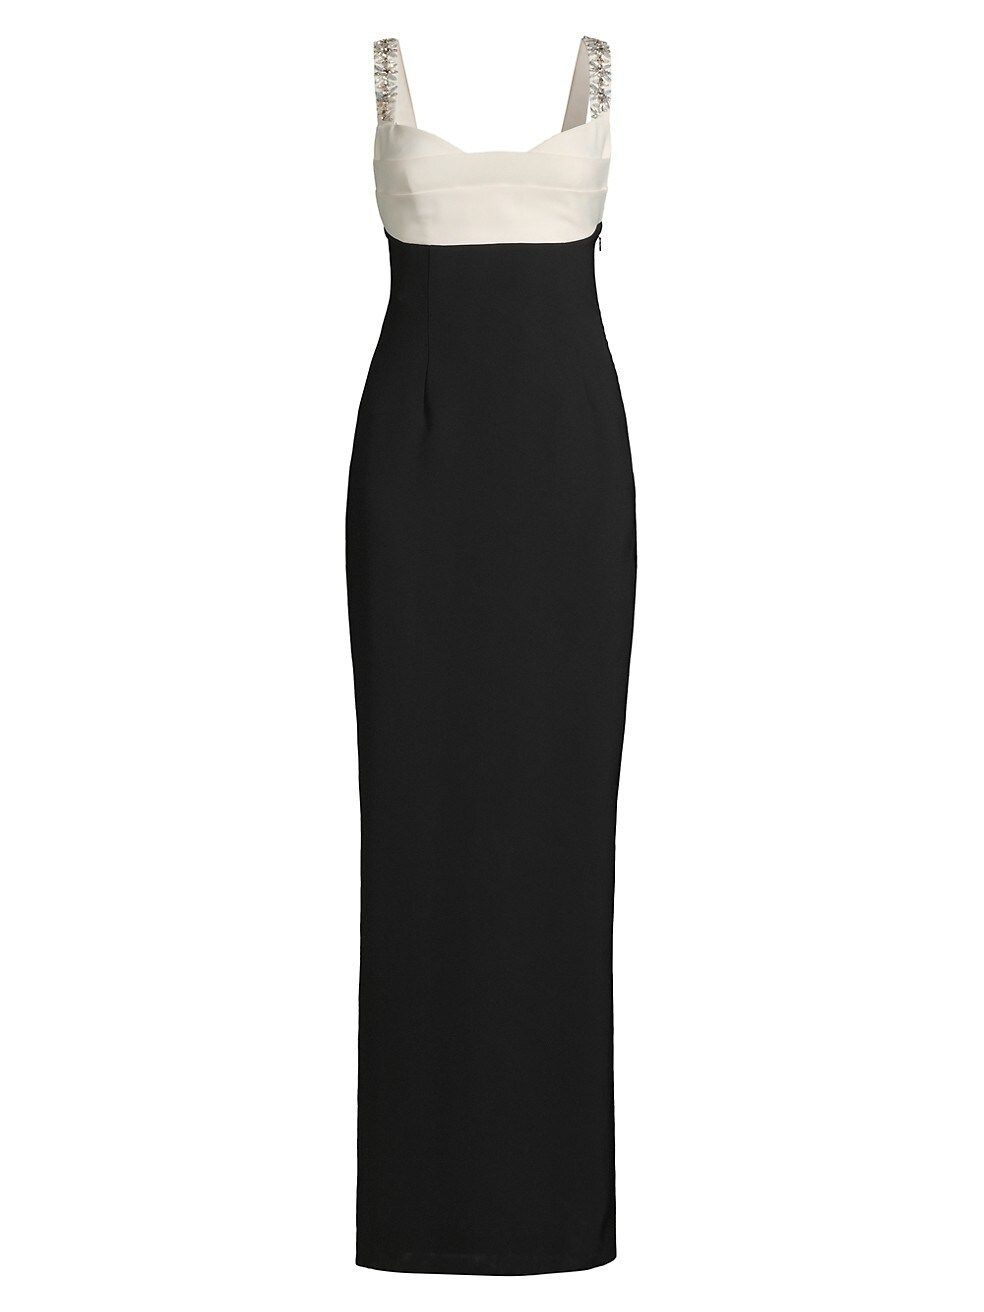 Domenica Embellished Column Gown | Saks Fifth Avenue